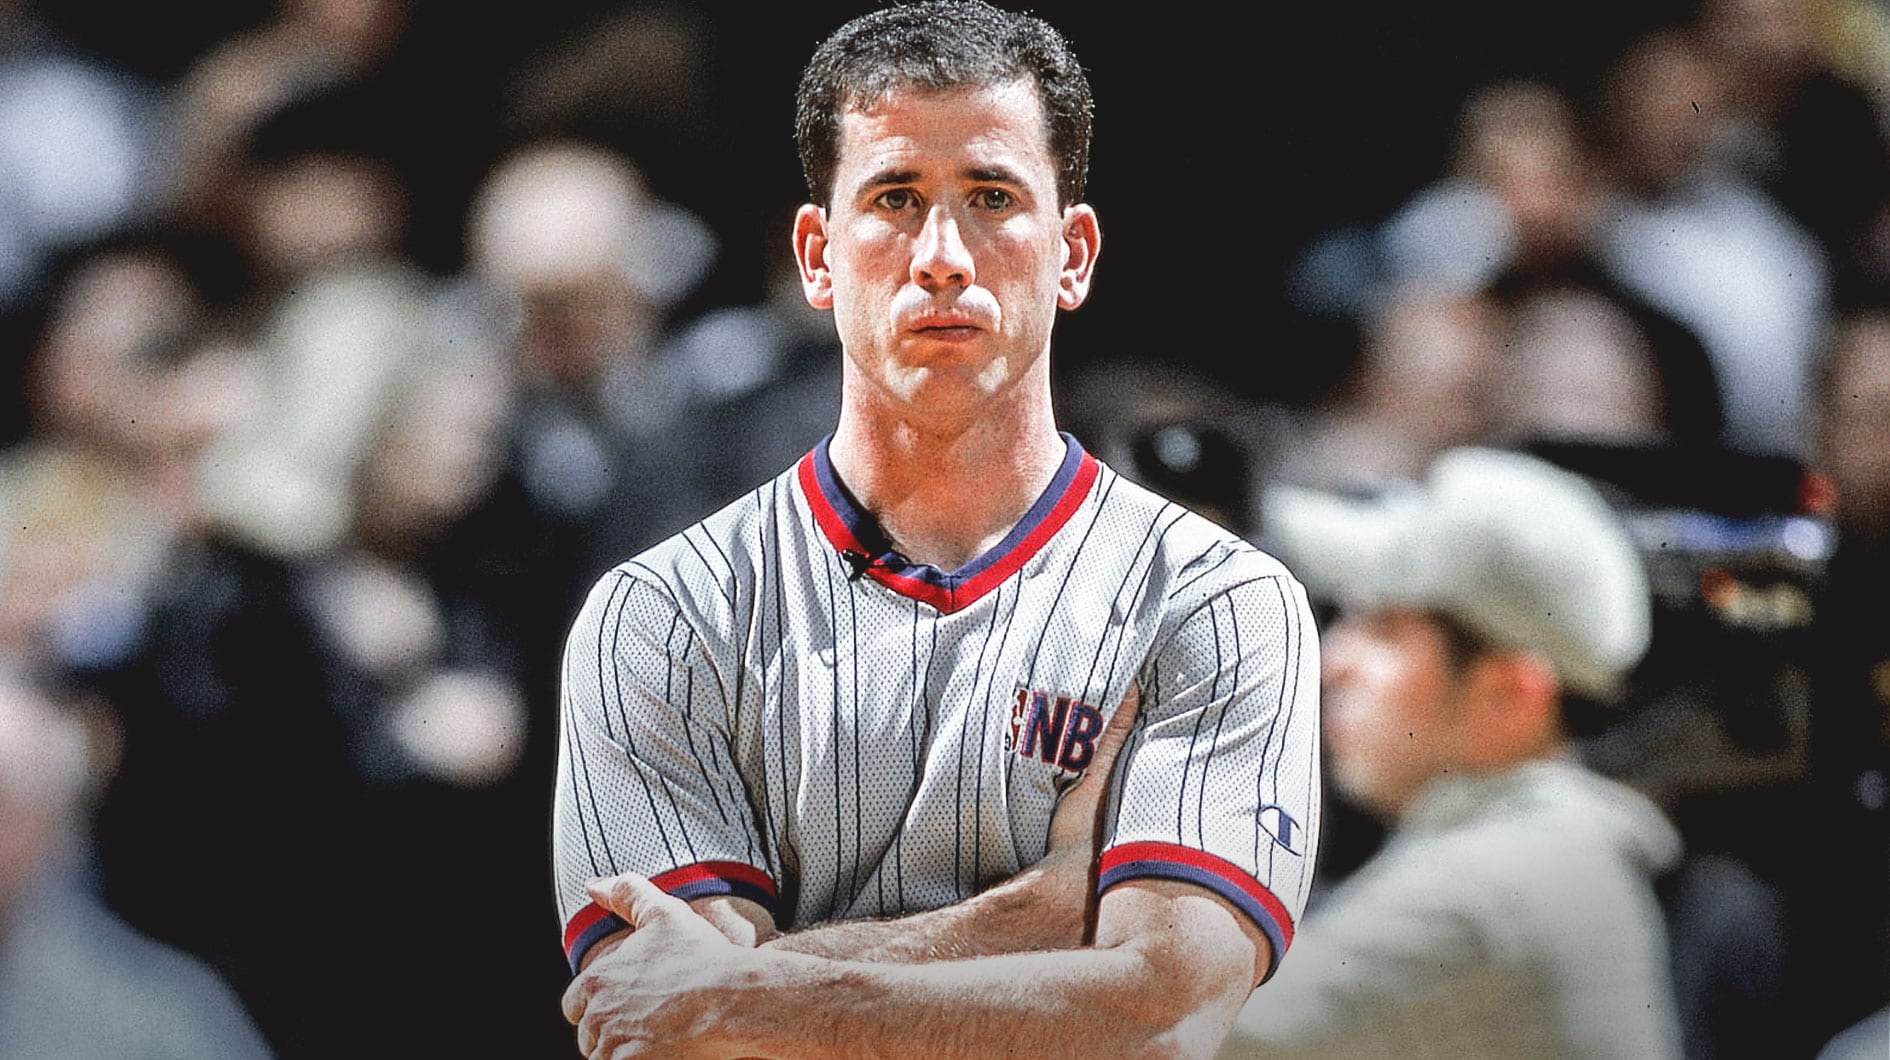 Convicted Ex Ref Tim Donaghy Debuts in Major League Wrestling